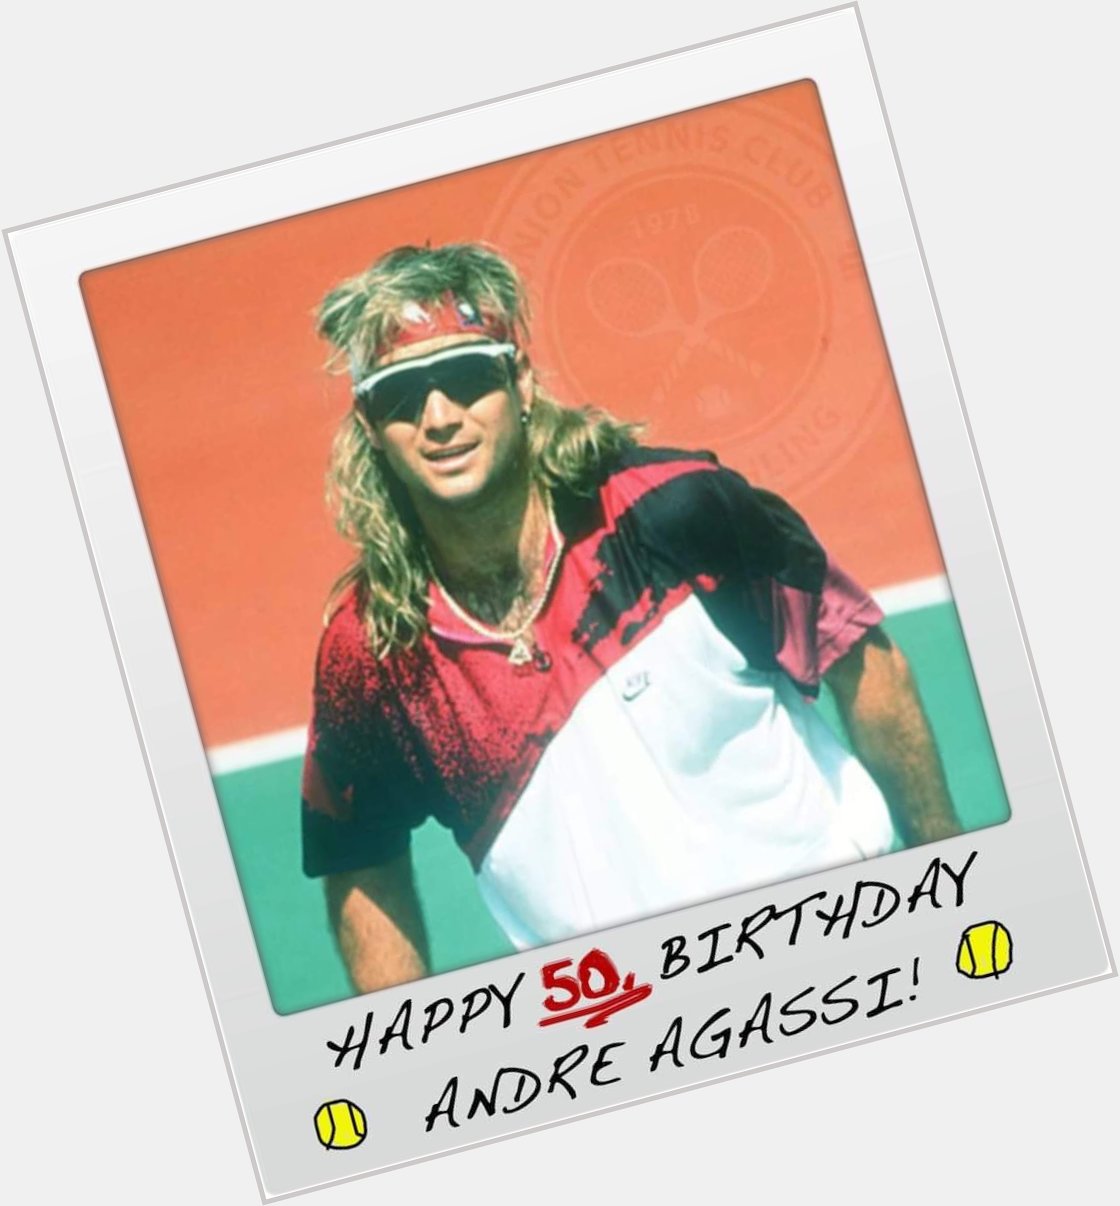 Happy 50. Birthday 
Andre Agassi! 